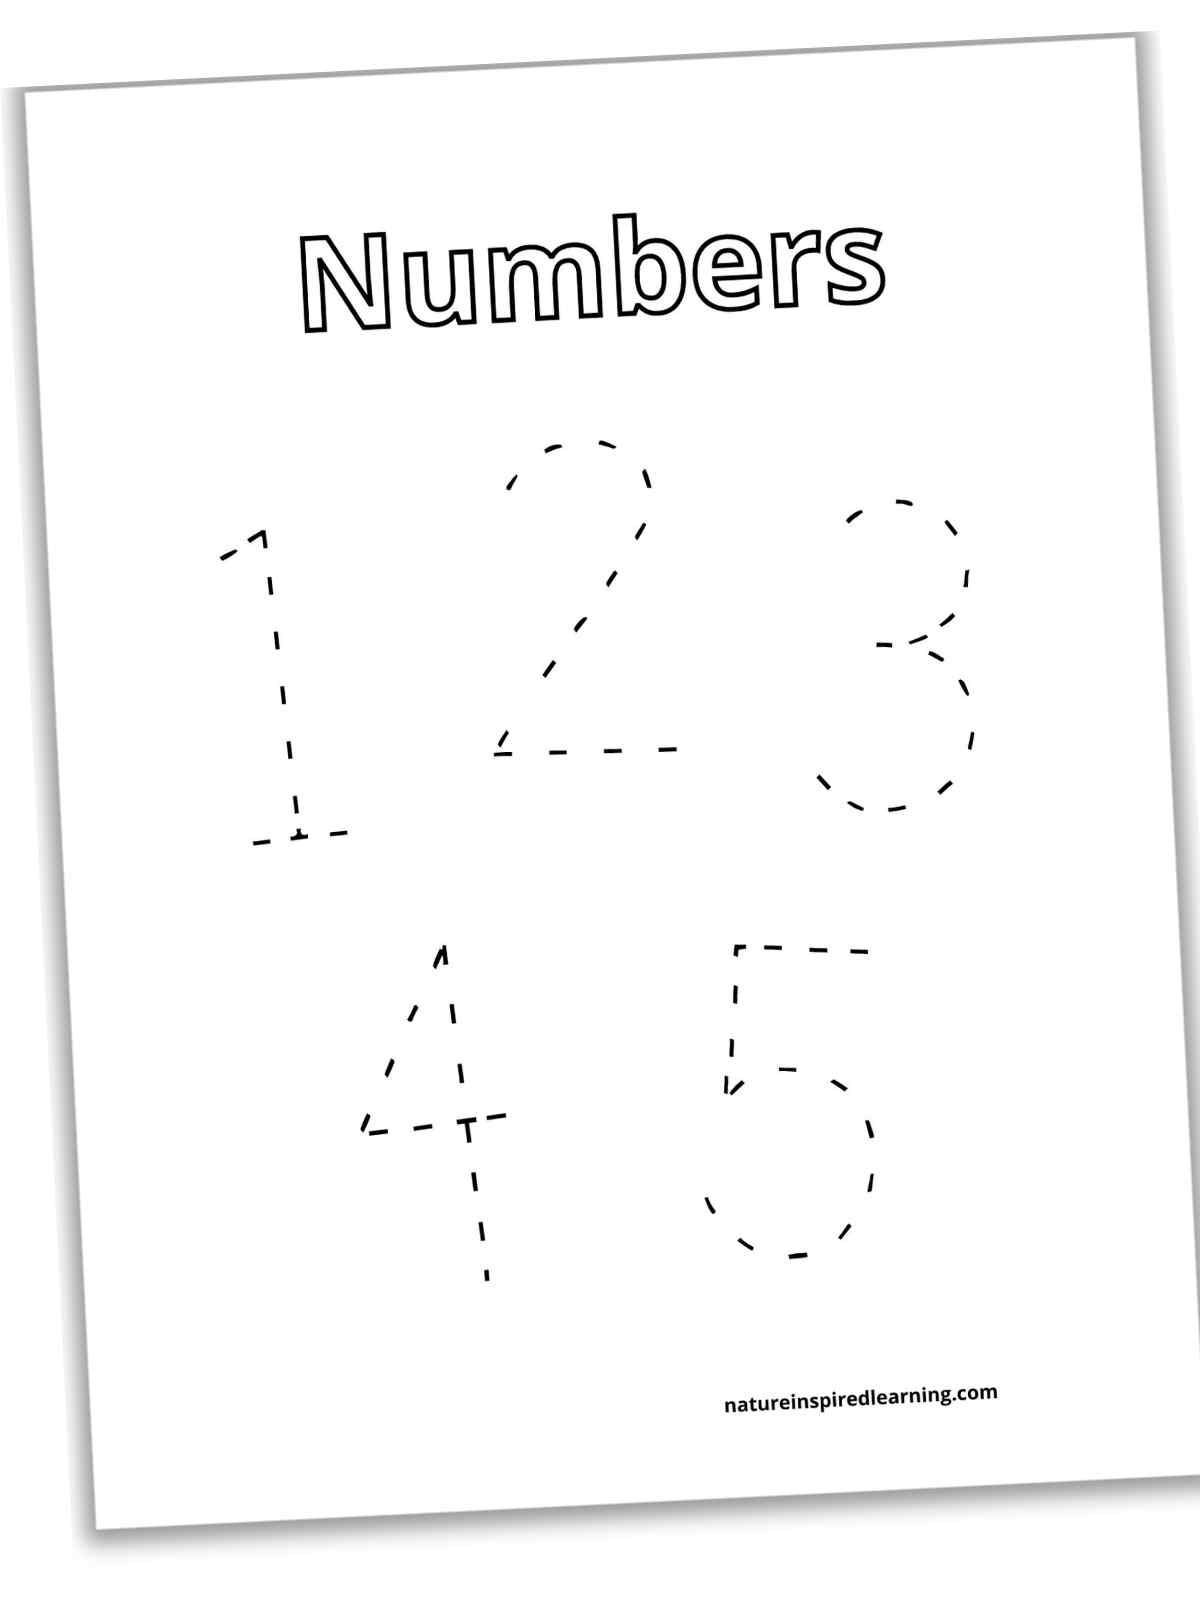 slanted black and white worksheet with randomly placed large numbers 1, 2, 3, 4, and 5 in dashed font with a title across the top.